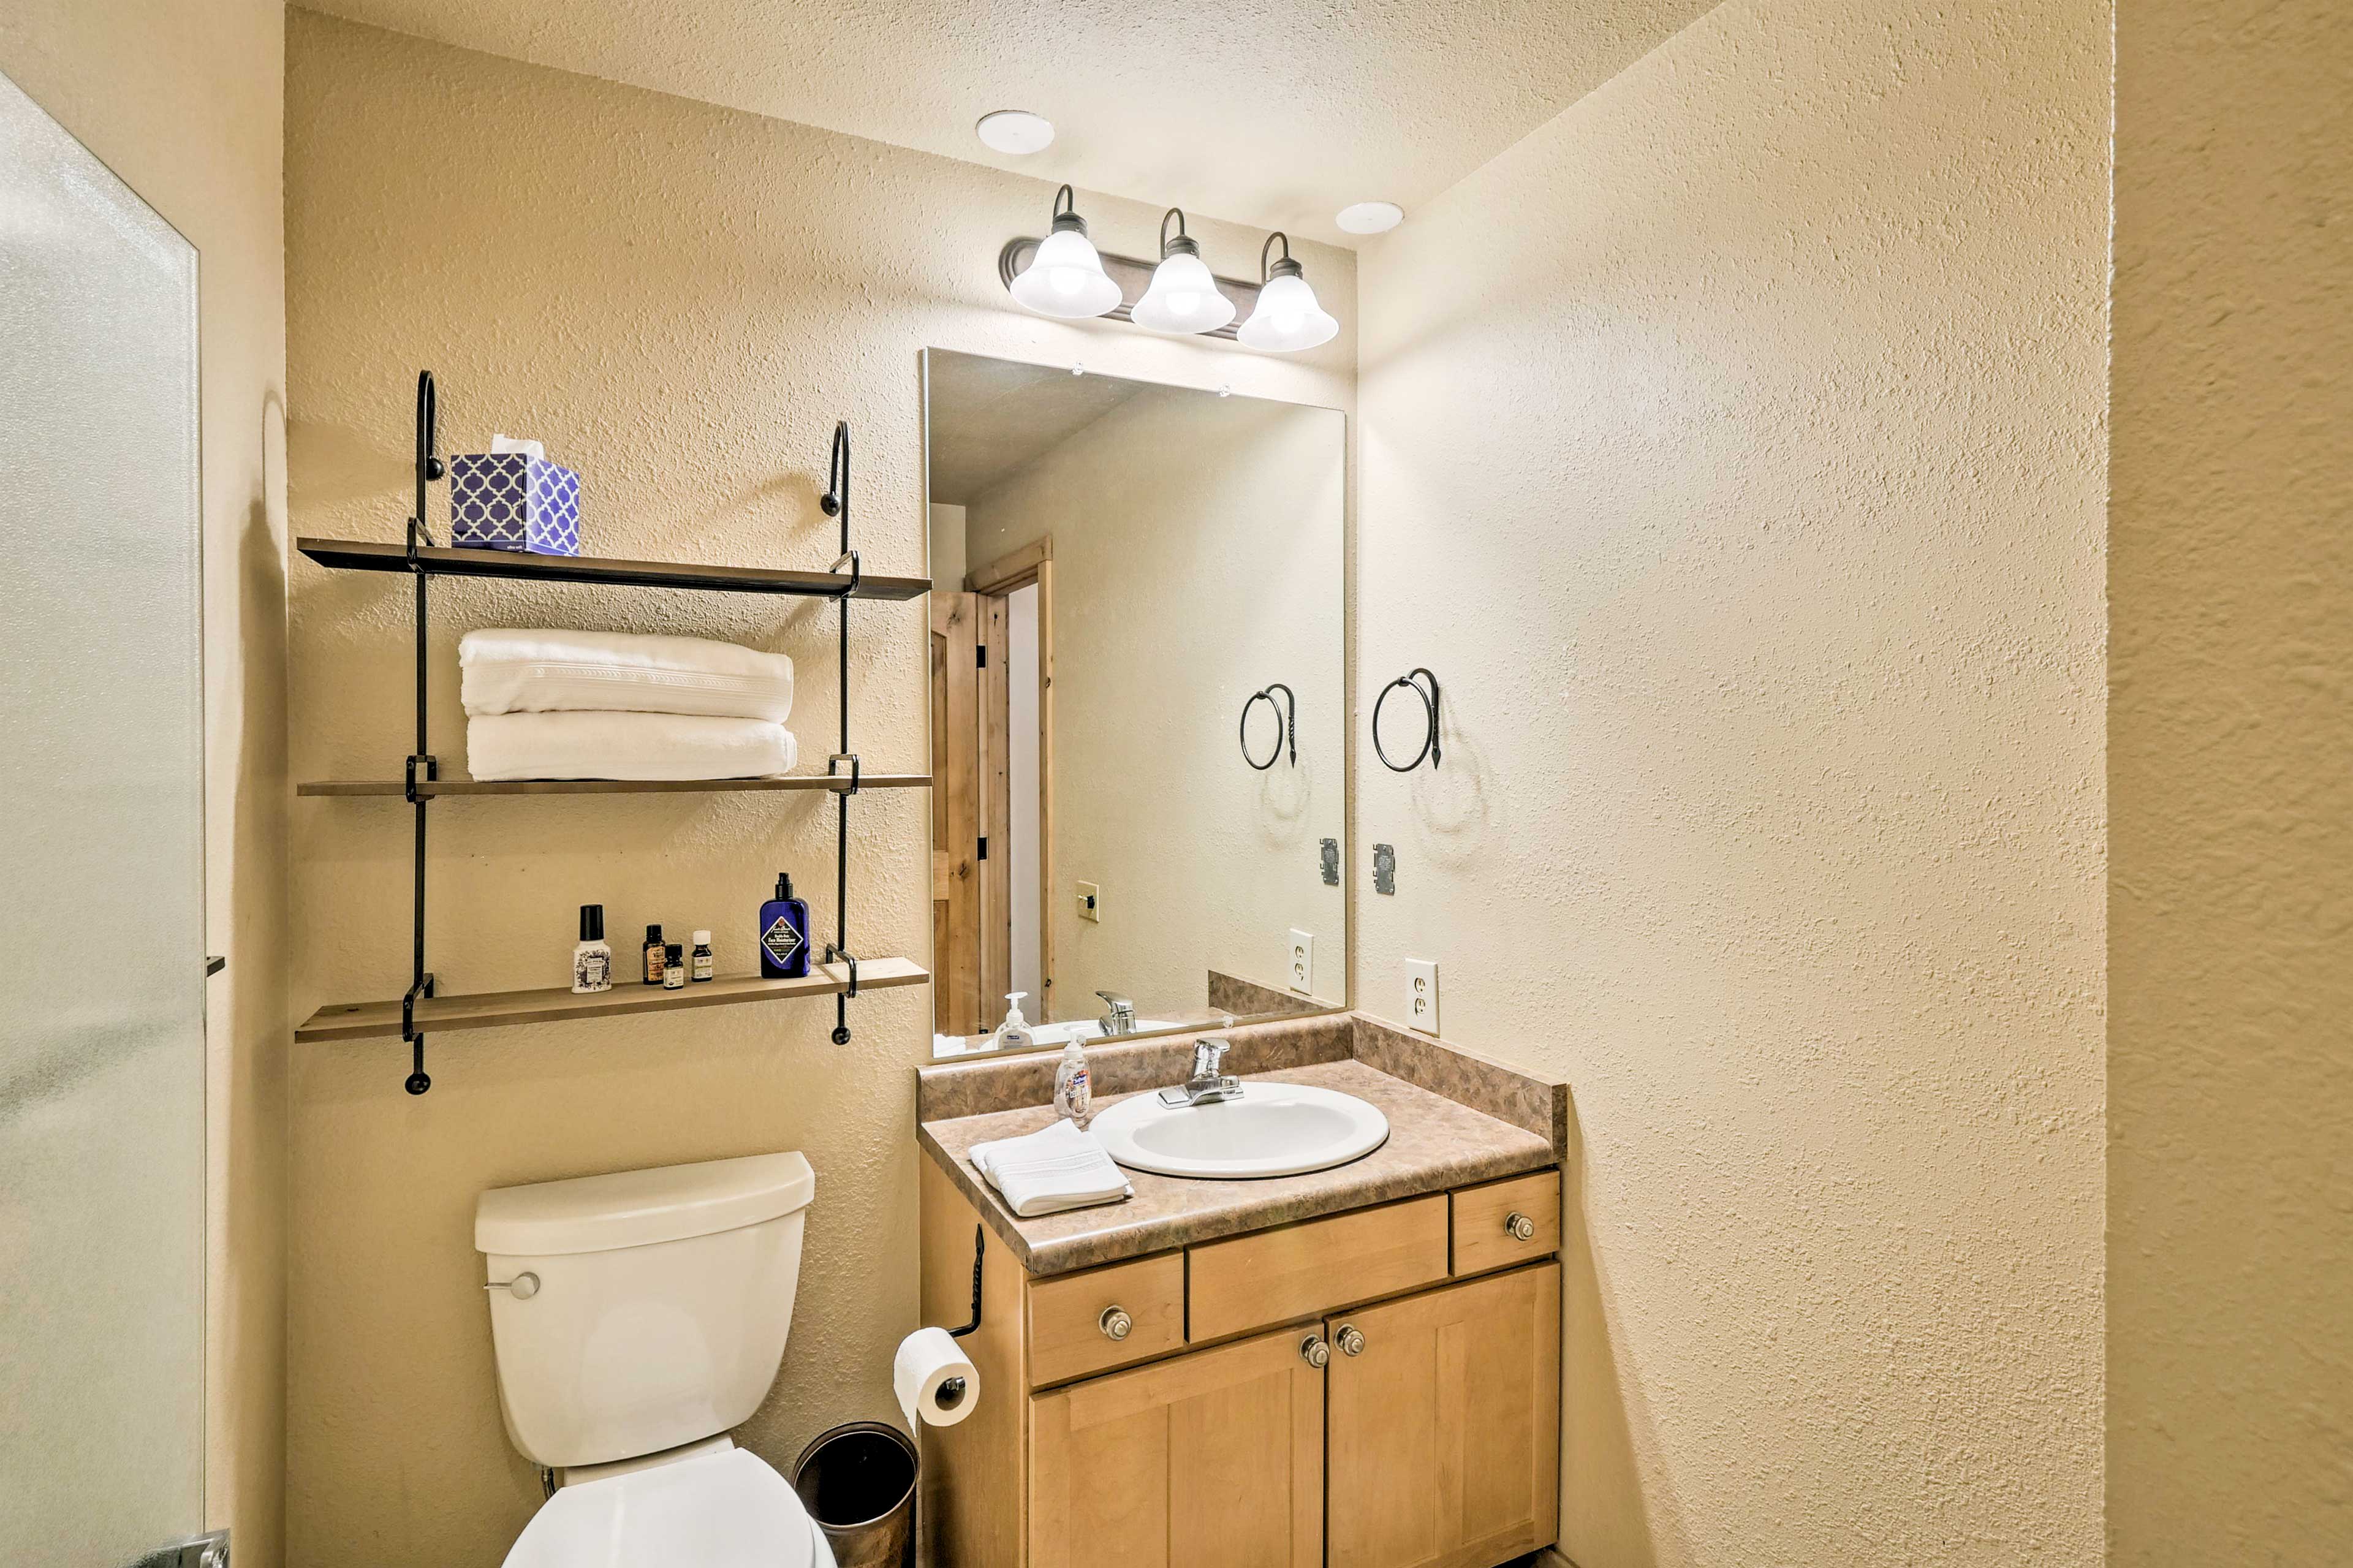 A second full bathroom offers additional privacy.